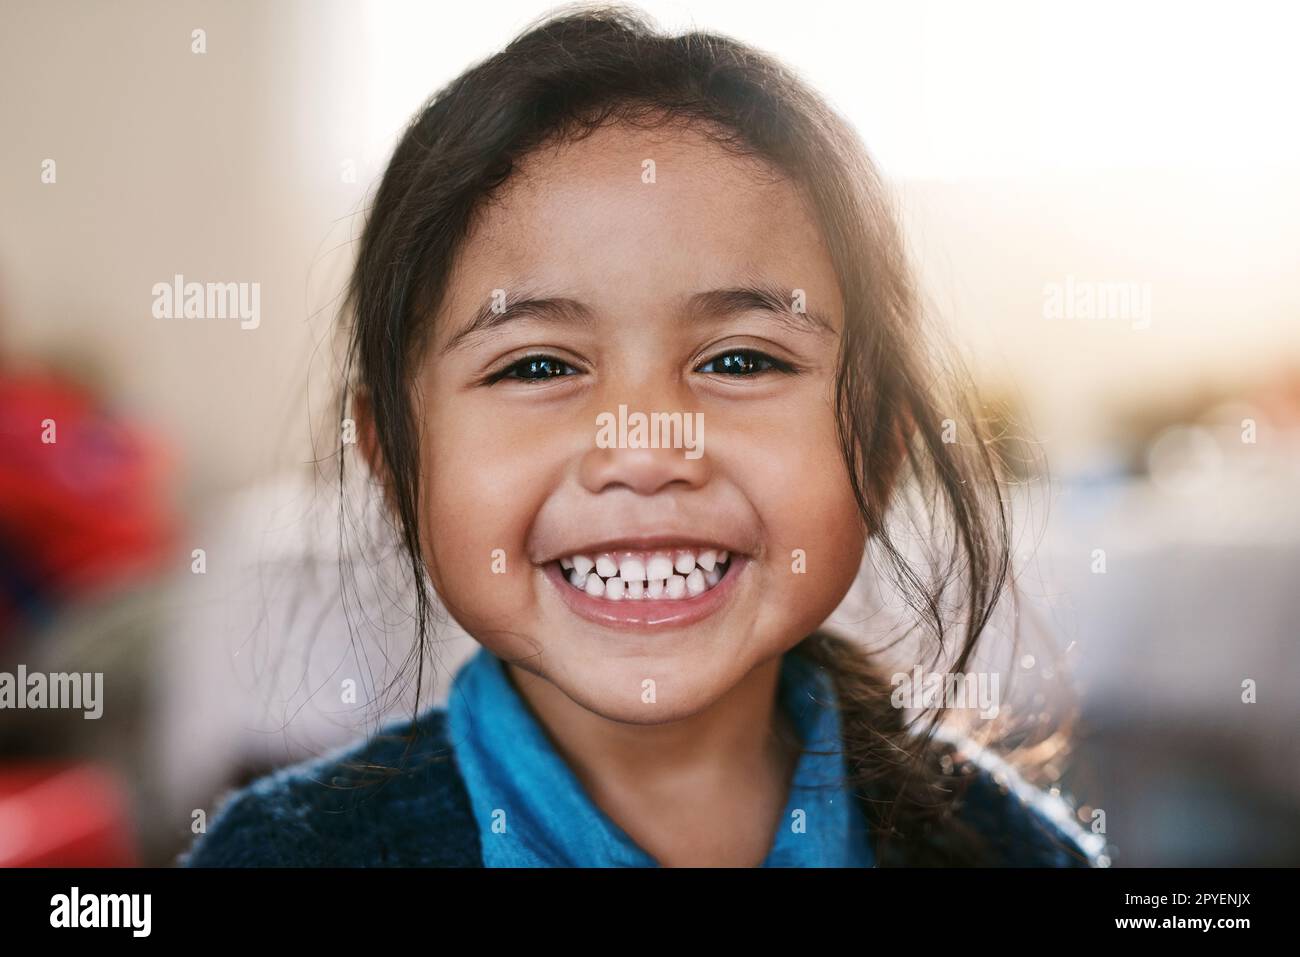 Turning into a big girl. Portrait of a cheerful little girl playing around at home while smiling all the way inside during the day. Stock Photo